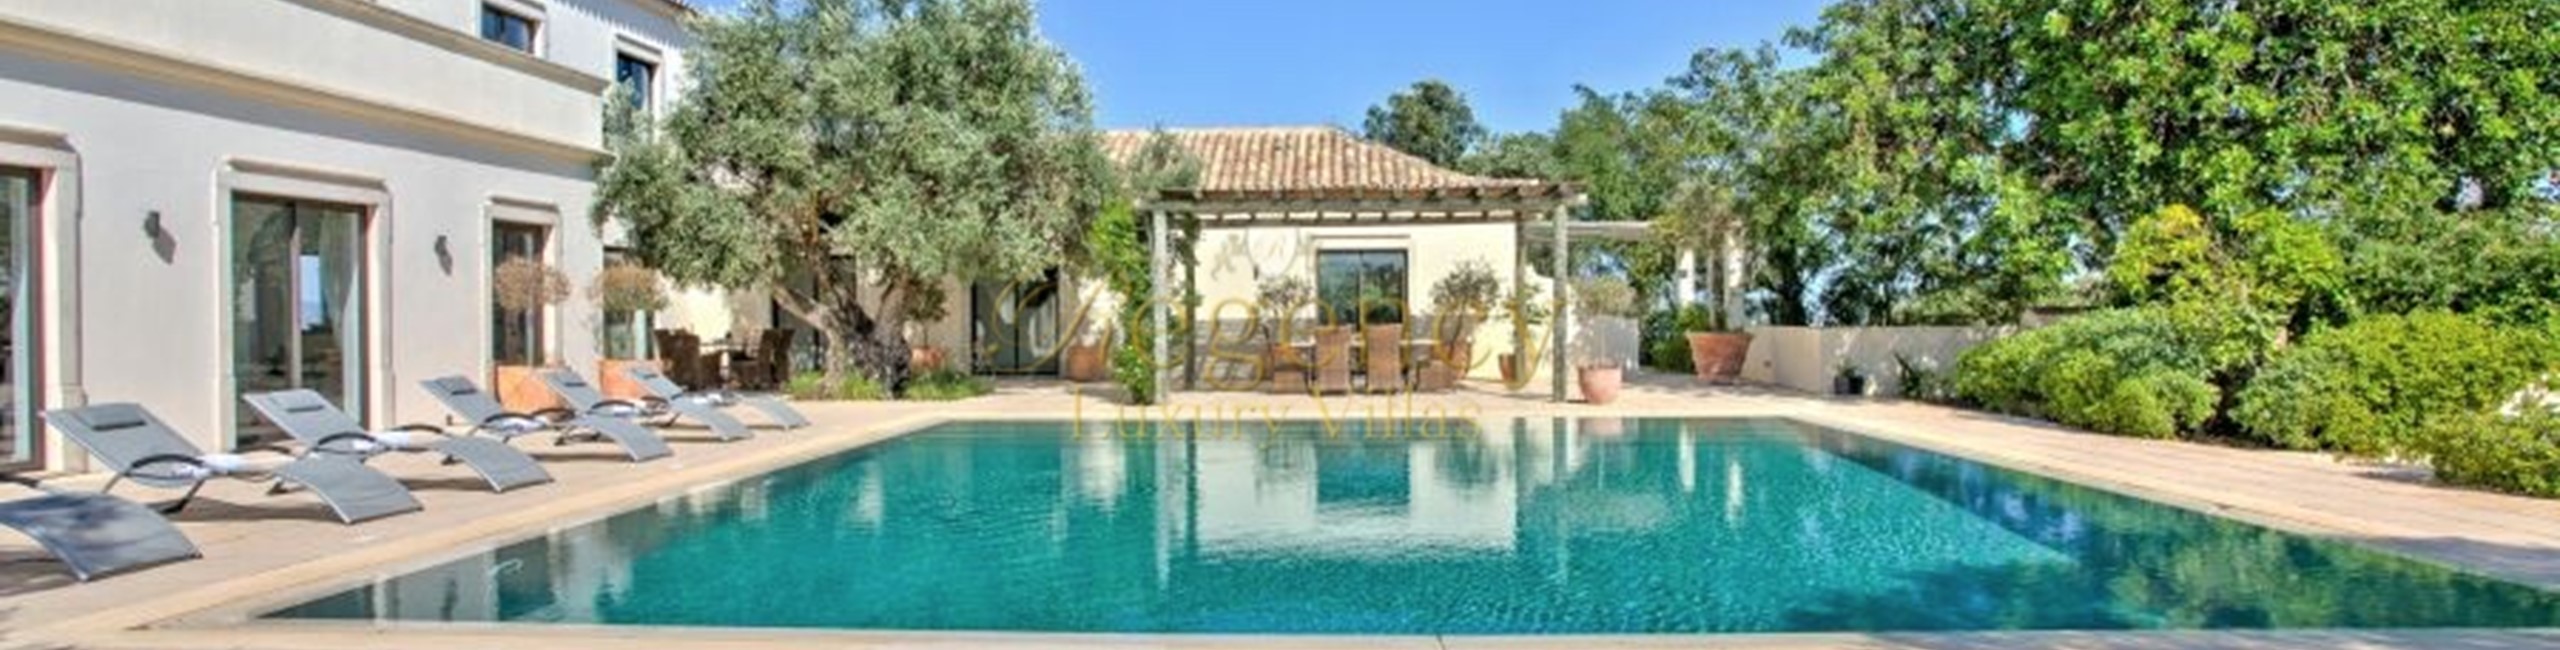 Villa to Rent In the Algarve Portugal With 3 Pools